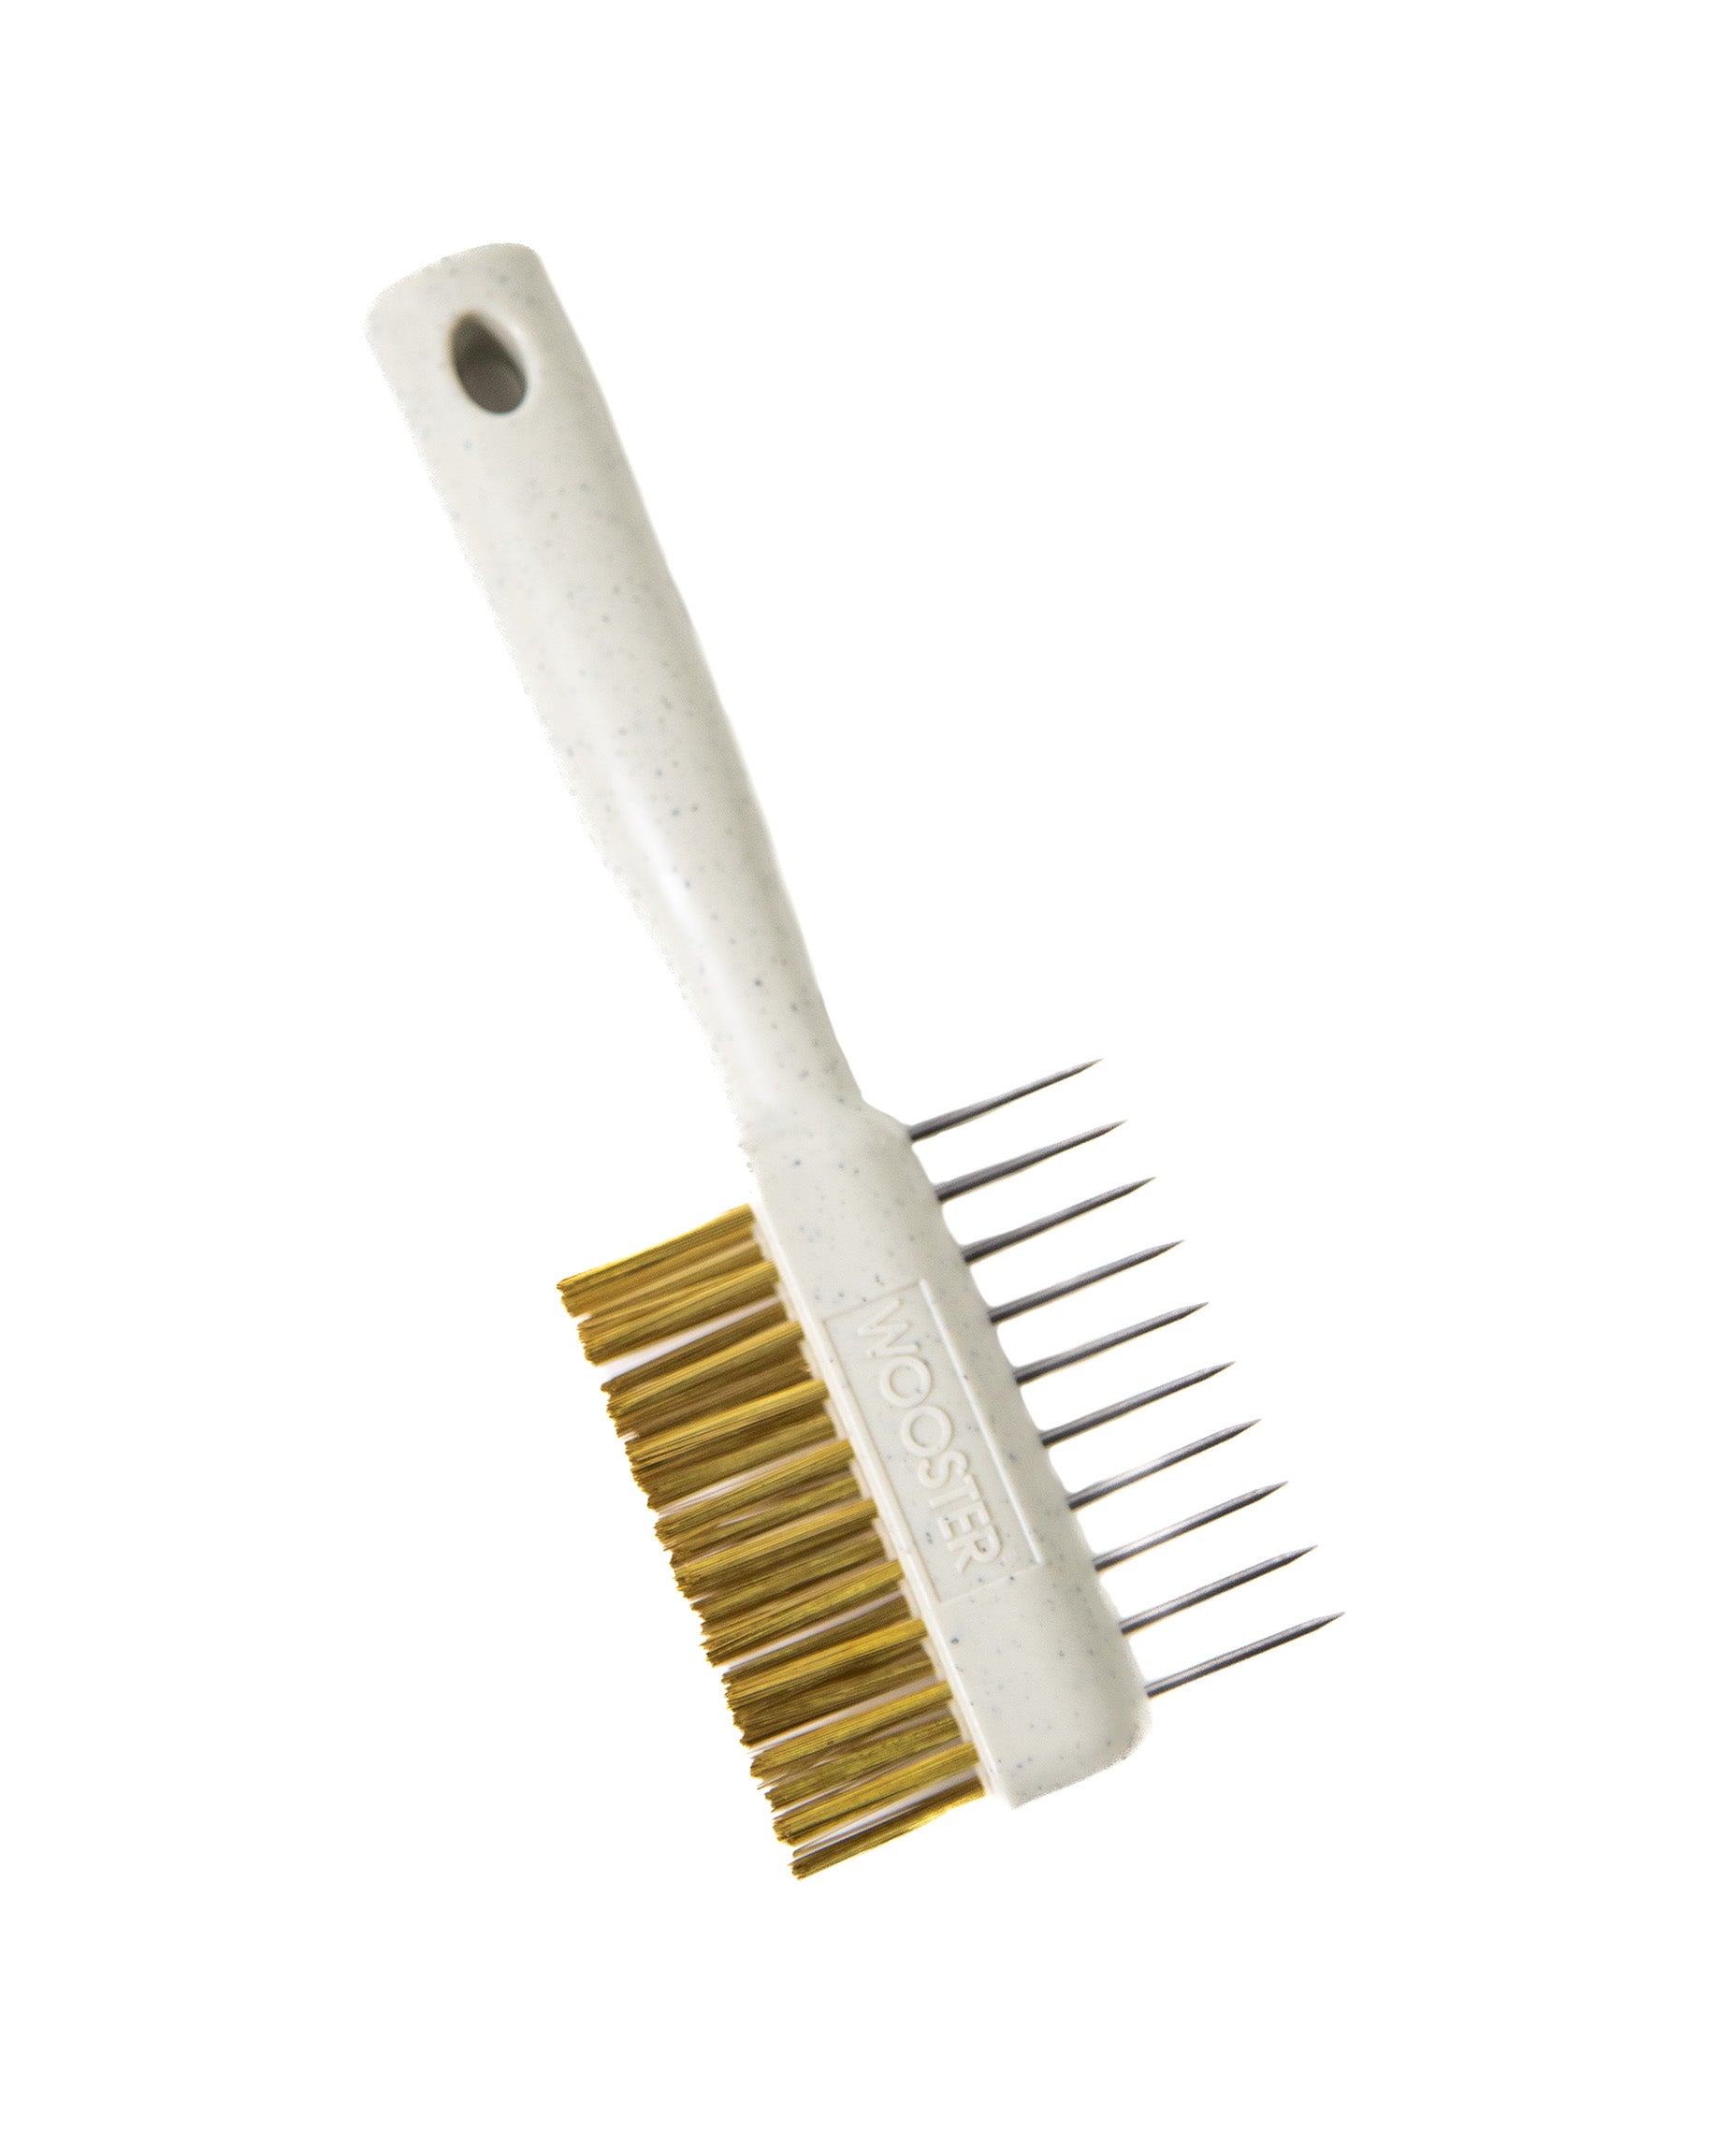 Wooster Painters Comb